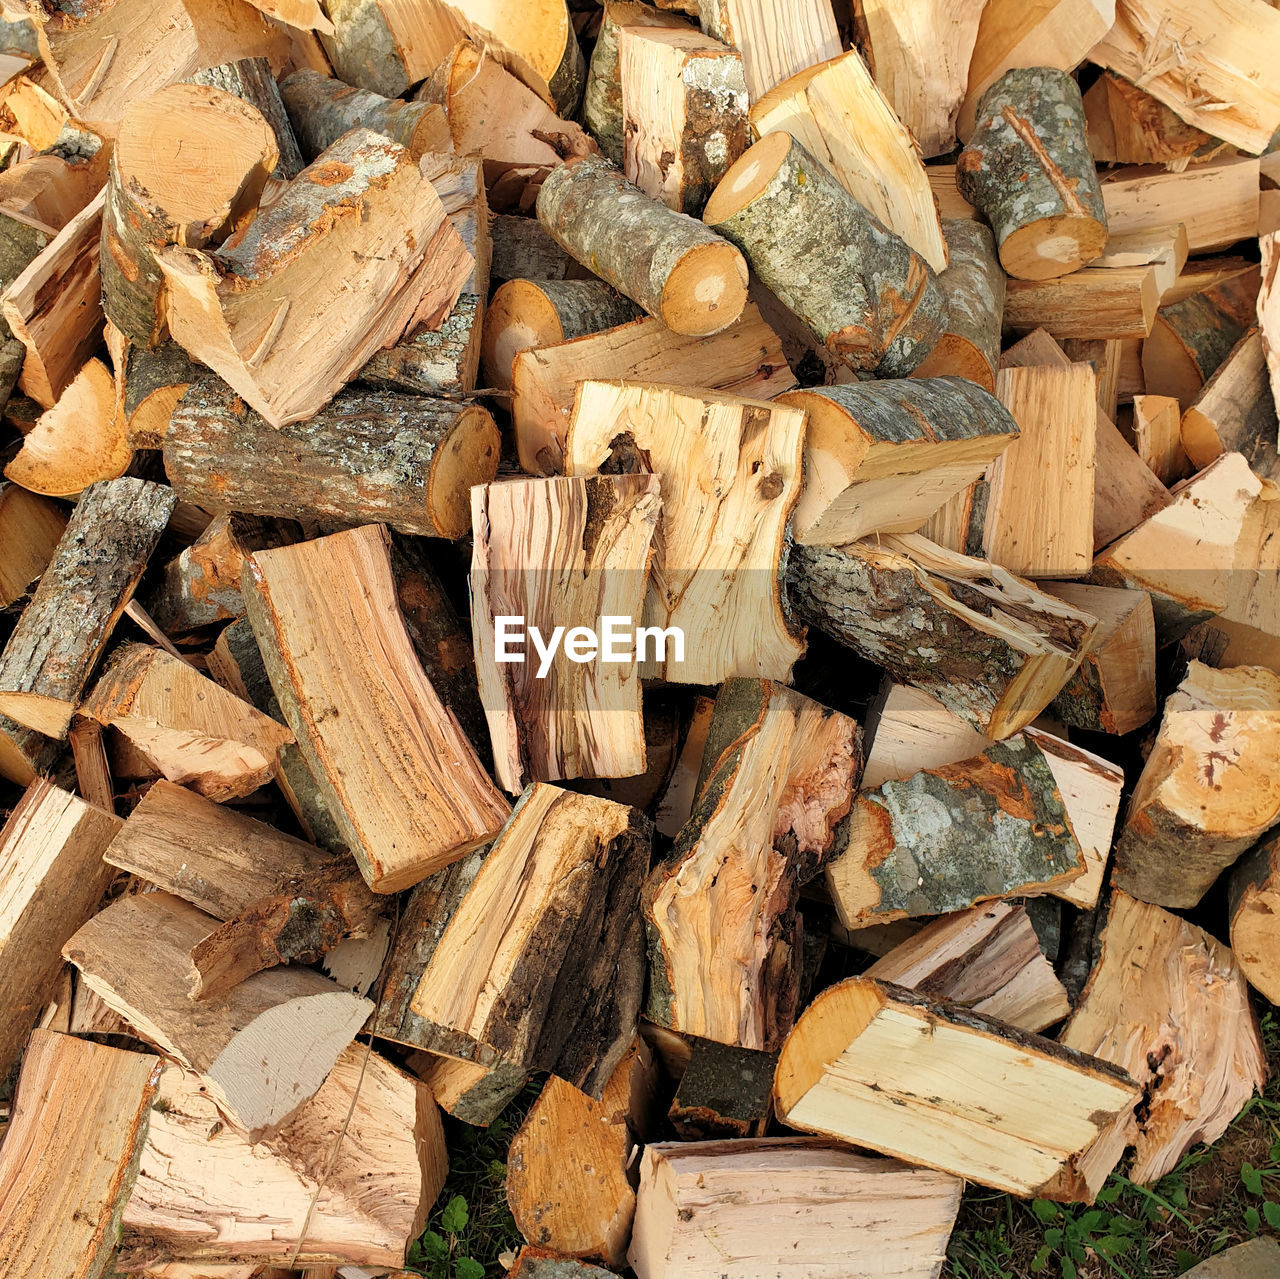 large group of objects, timber, wood, log, lumber industry, firewood, full frame, deforestation, abundance, backgrounds, forest, lumber, tree, woodpile, environmental issues, power generation, no people, fossil fuel, heap, nature, logging, day, environmental damage, chopped, outdoors, brown, textured, pattern, trunk